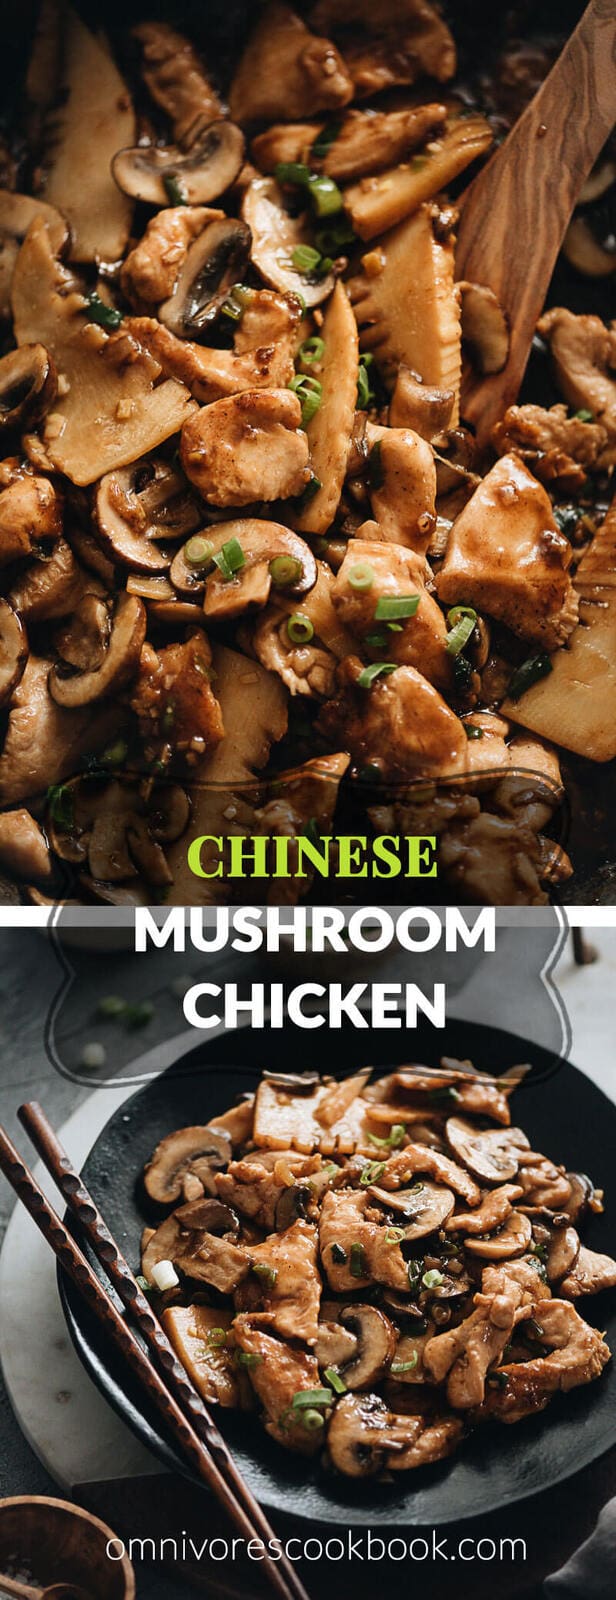 Mushroom chicken (Panda Express style) - The dish is very easy to make and perfect for a weekday dinner. The tender chicken bites are cooked in an aromatic savory sweet sauce with juicy mushrooms and crispy bamboo shoots. {Gluten-Free adaptable}